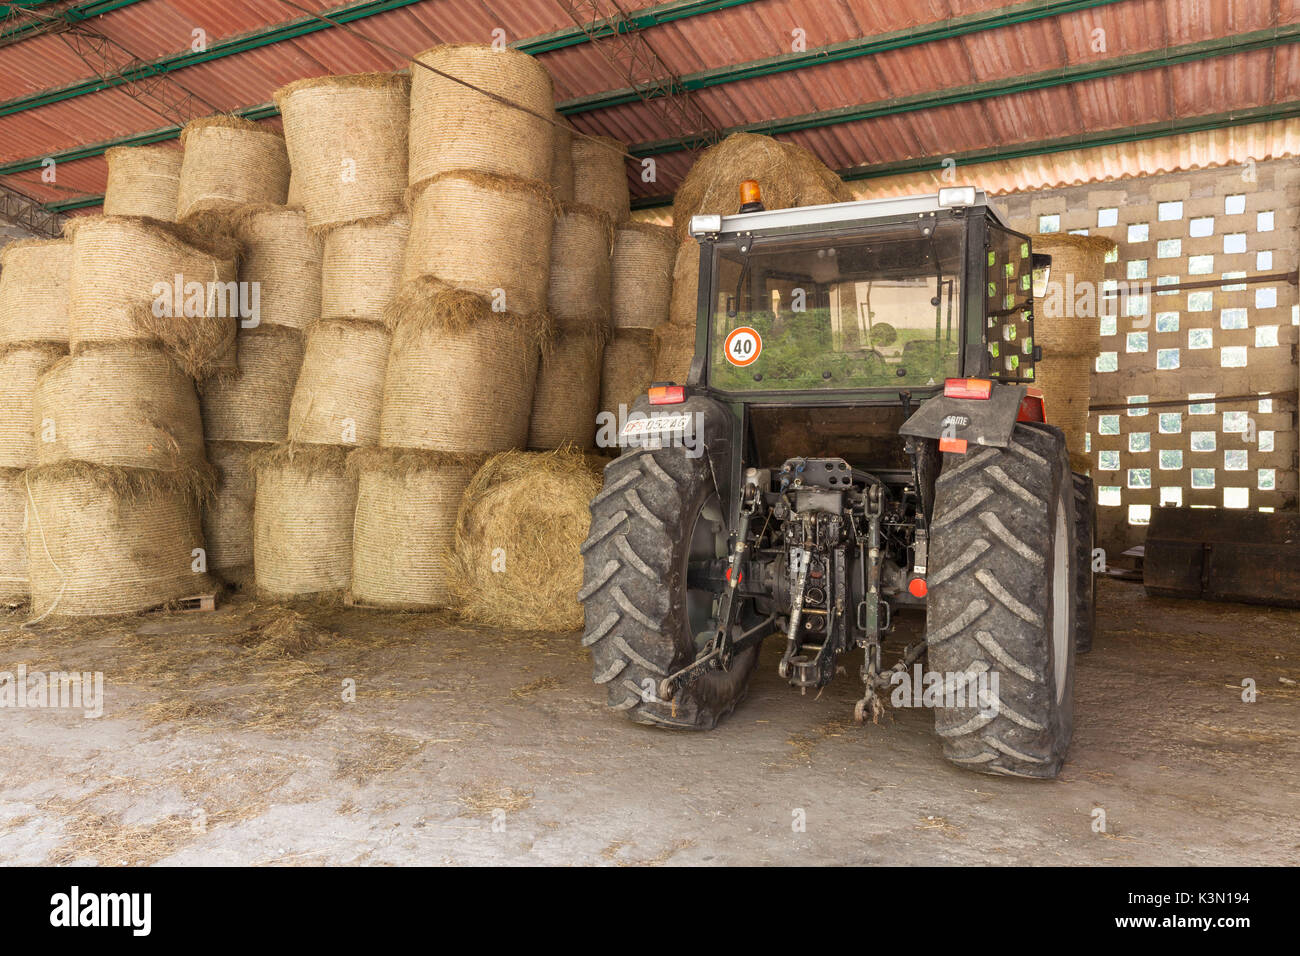 Tractors, equipment and bales of hay in the shed in front of the stables of Case Salet, State Natural Reserves, Monti del Sole Stock Photo